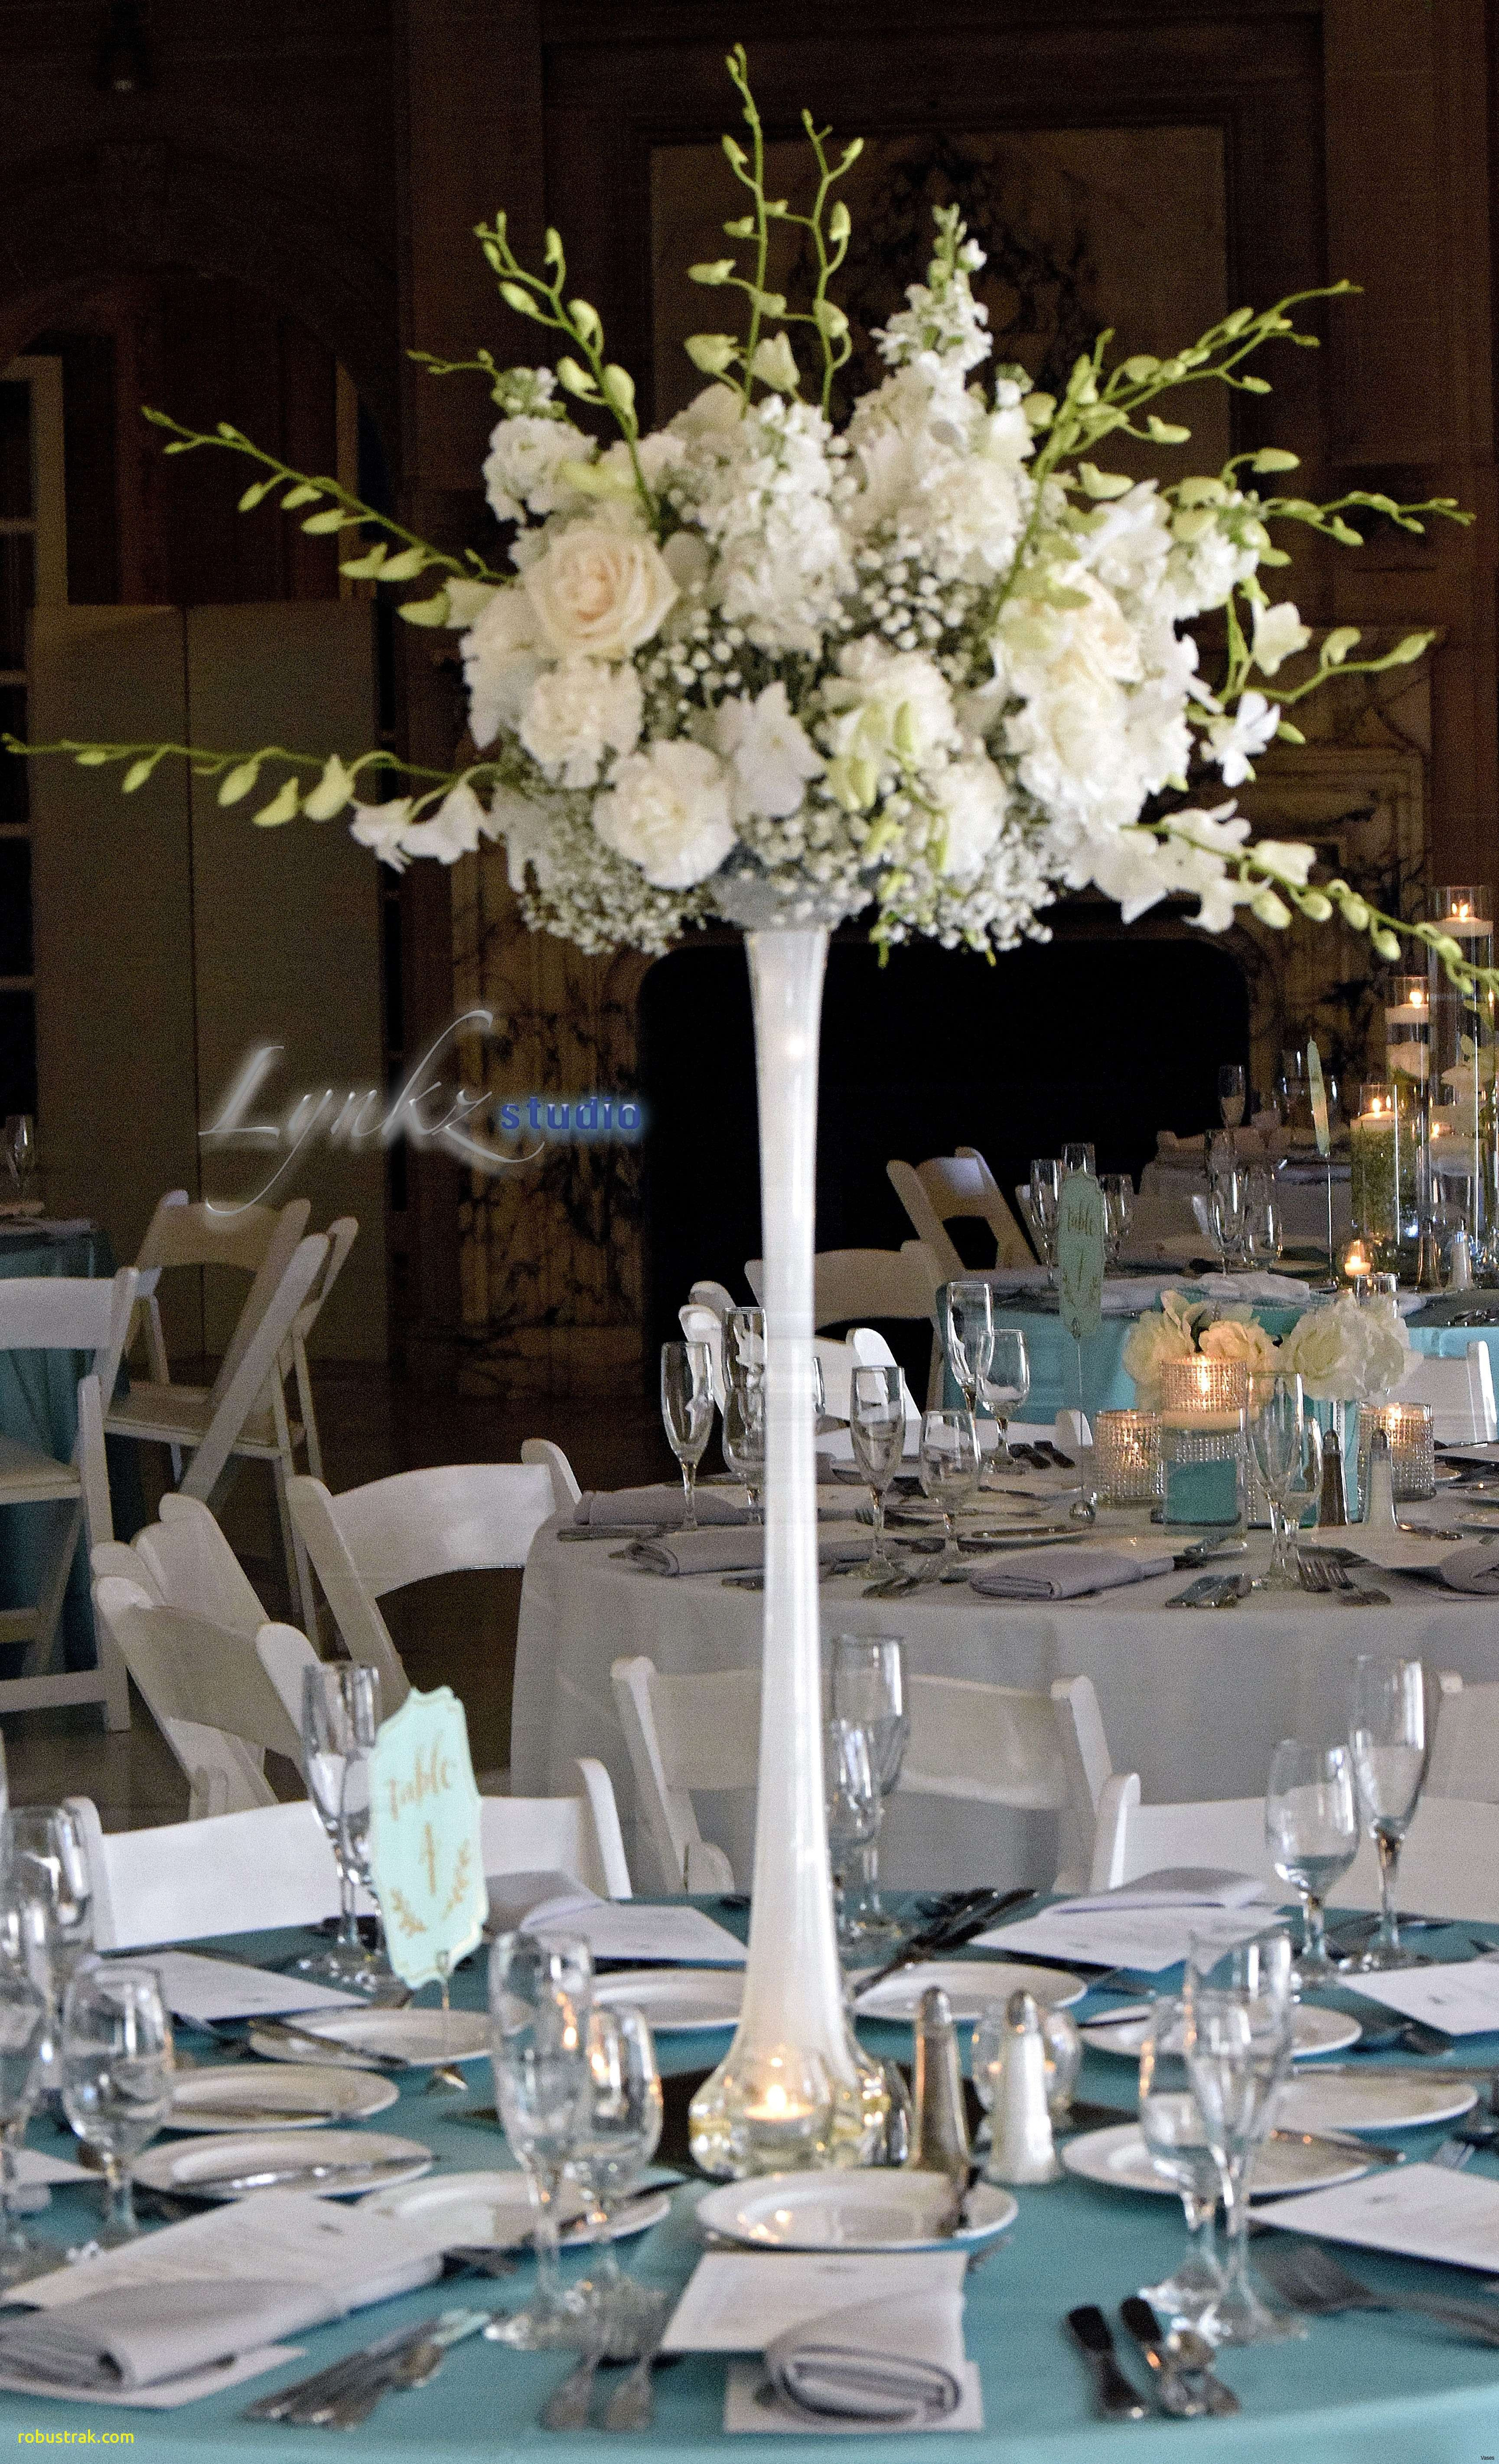 28 Best Floating Flowers In Vases Centerpieces 2024 free download floating flowers in vases centerpieces of wedding ideas for spring night wedding decorations ideas gallery within wedding ideas for spring night wedding decorations ideas gallery wedding dre